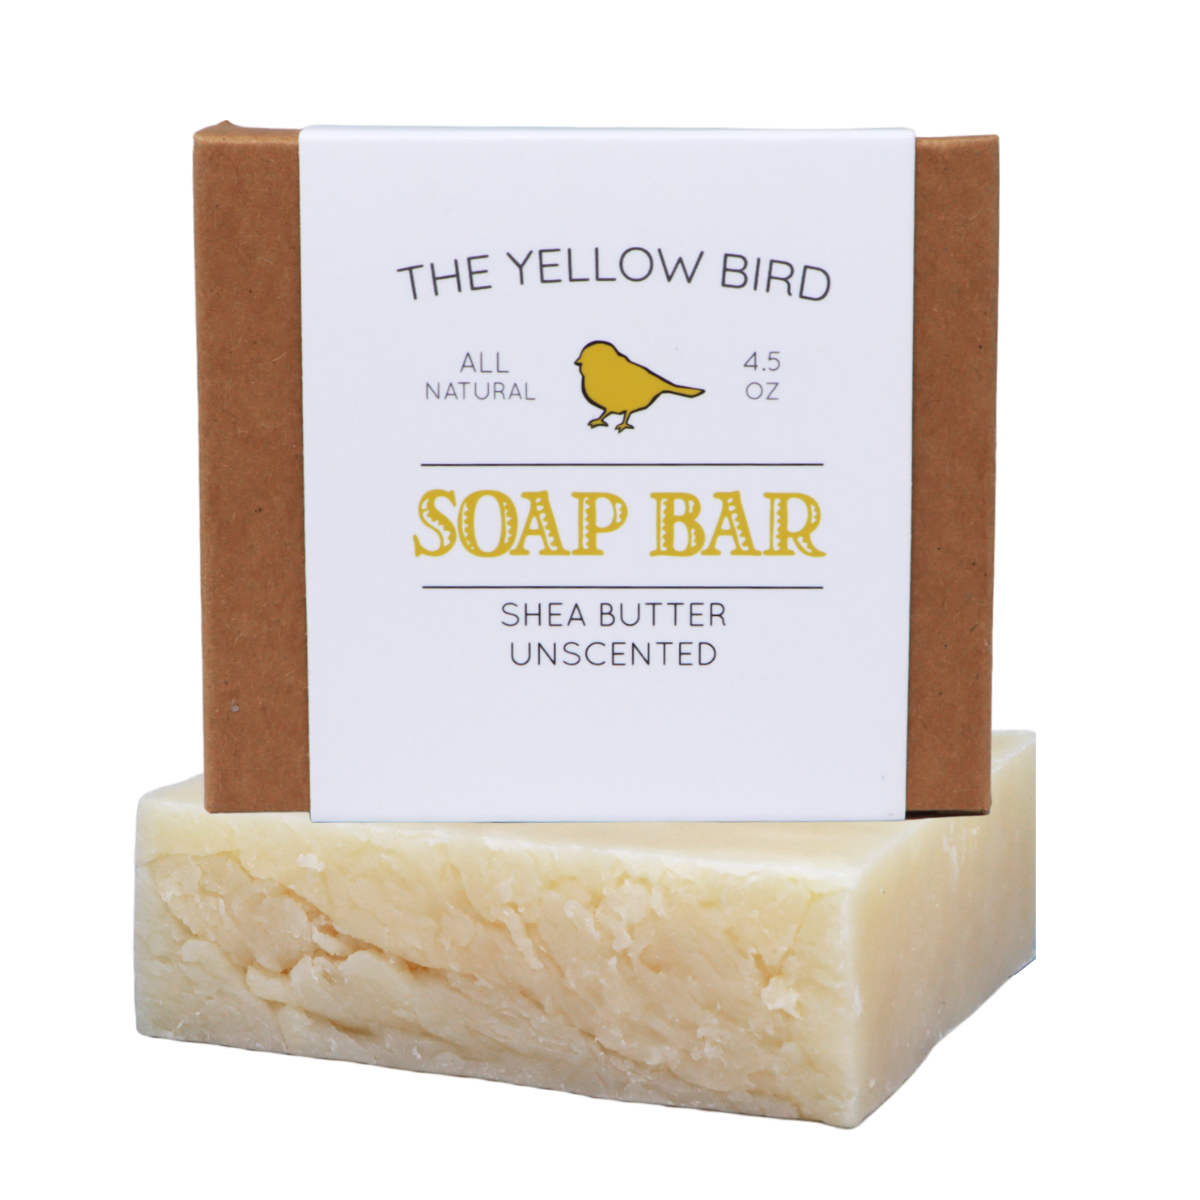 The Yellow Bird Fragrance Free Soap for Sensitive Skin. Hypoallergenic Soap Bar. Natural, Unscented, Organic Ingredients. Moisturizing Shea Butt